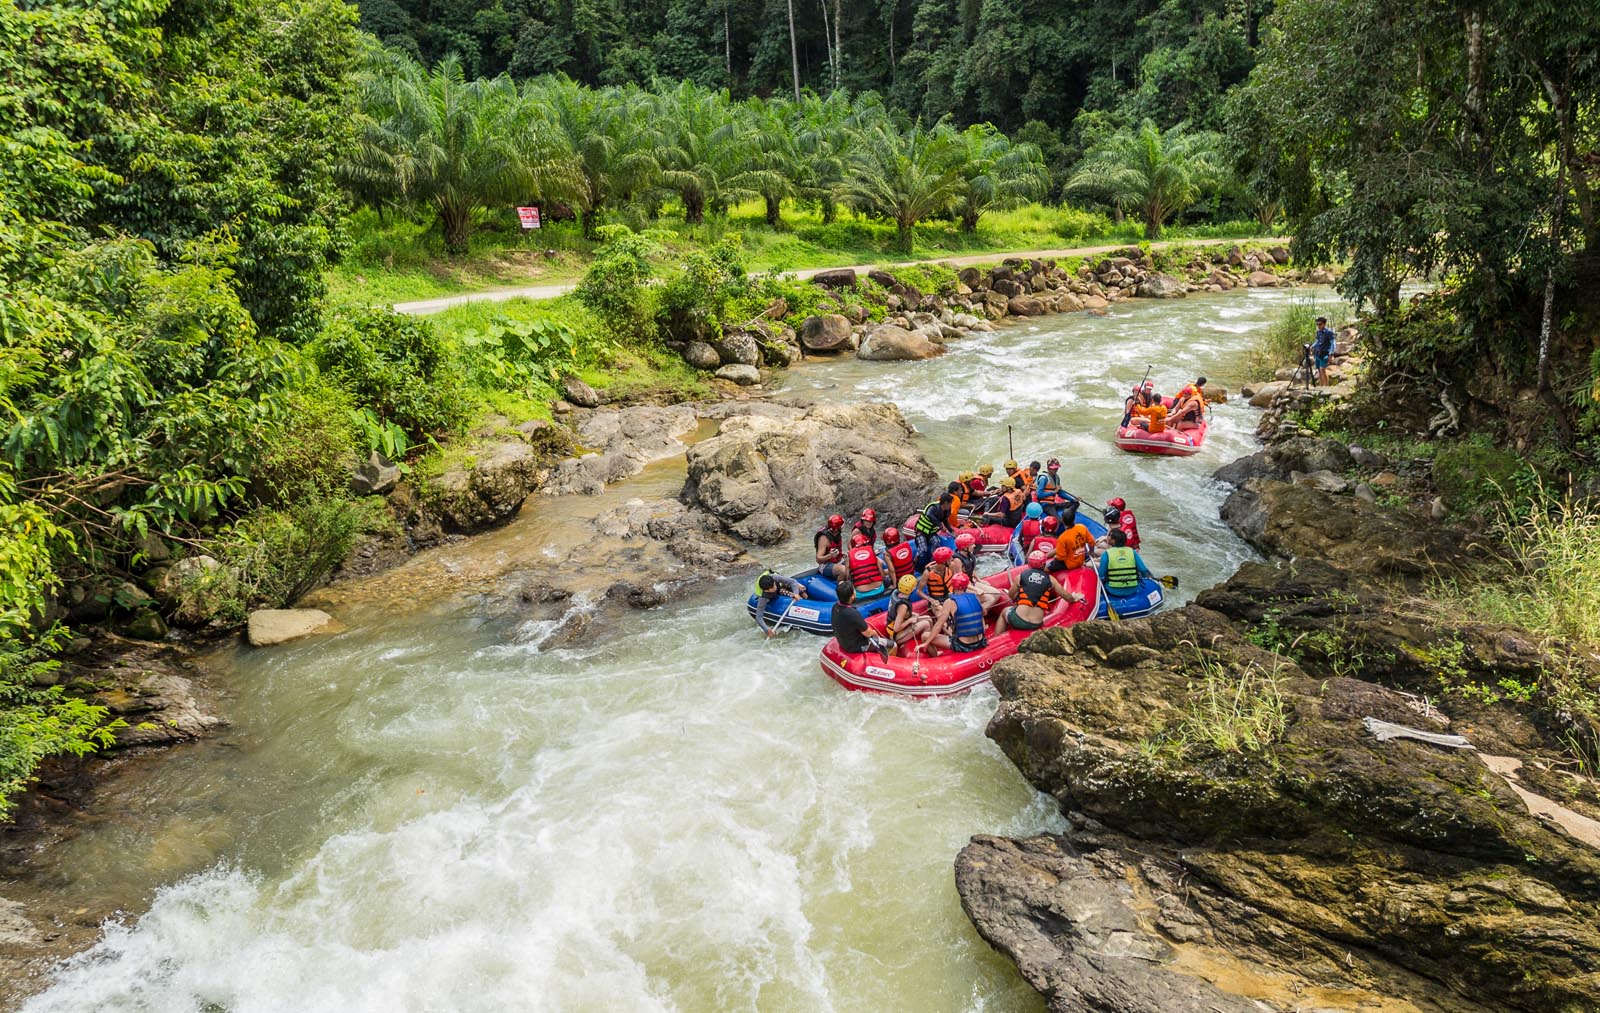 Tourists are rafting in a stream in a forest in Phuket